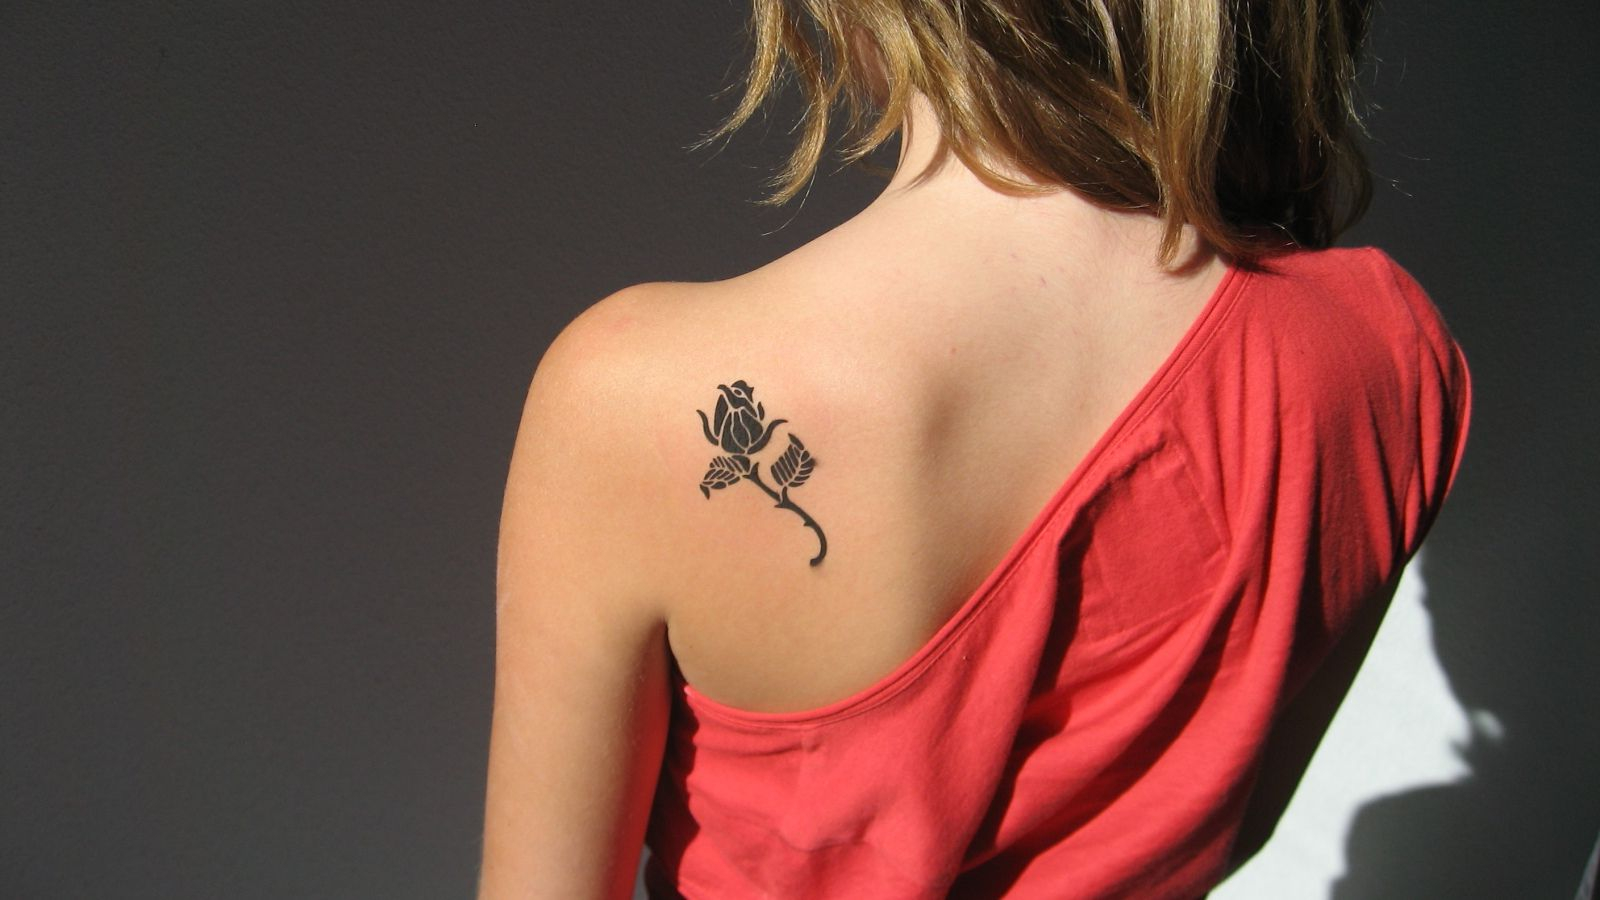 Girl Tattoos On Shoulder Blade 30 Small Cute Tattoos For Girls throughout dimensions 1600 X 900